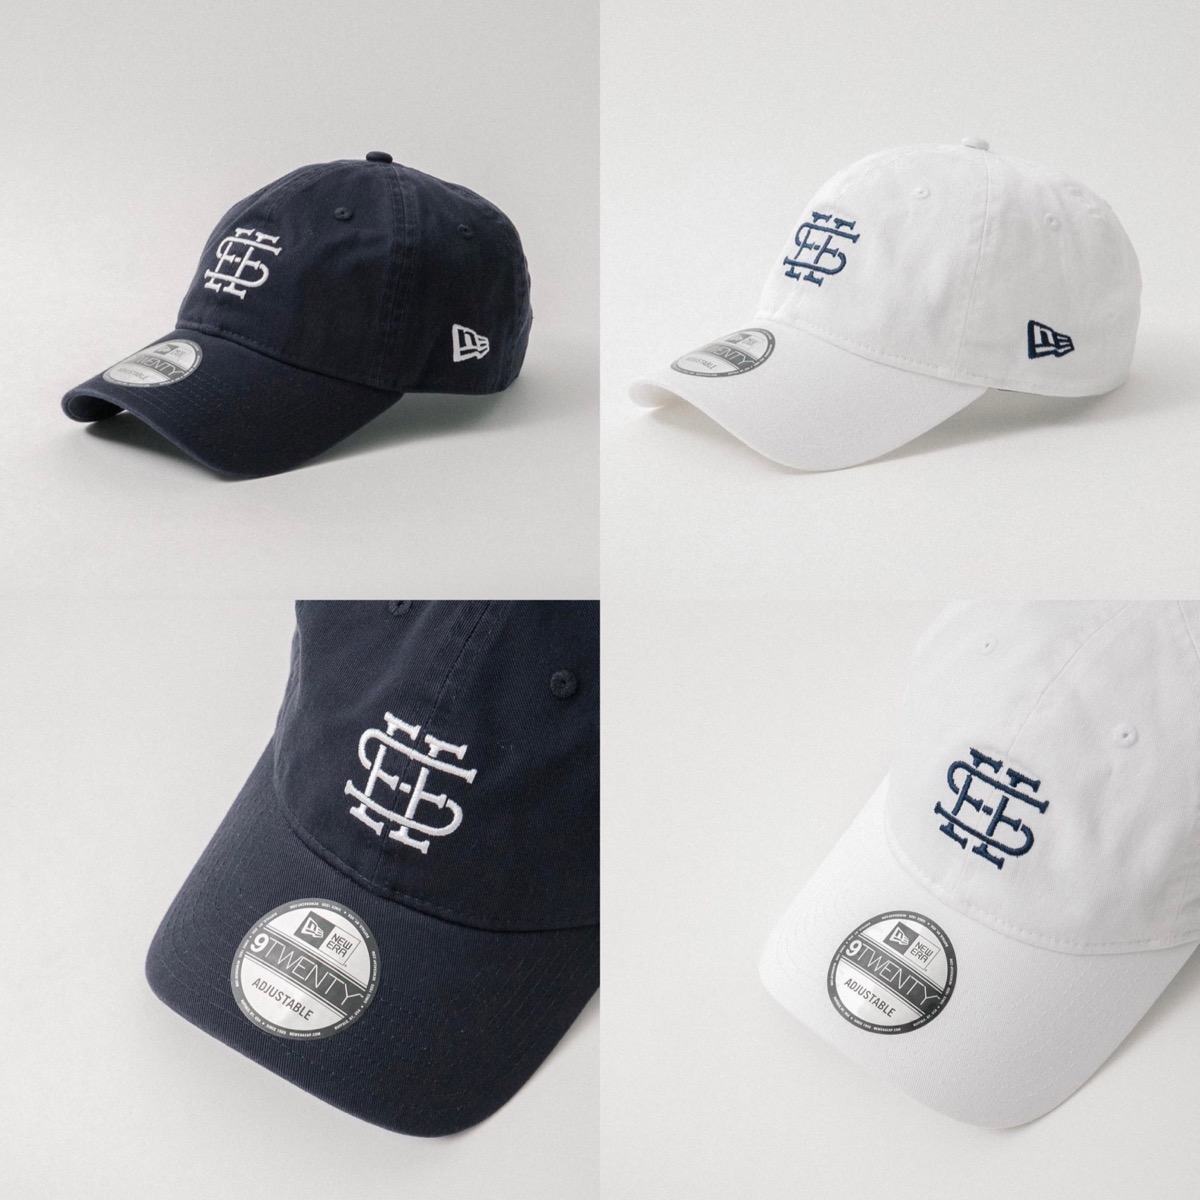 SEE SEE × New Era 新作コラボキャップが国内7月15日／7月16日にYGM